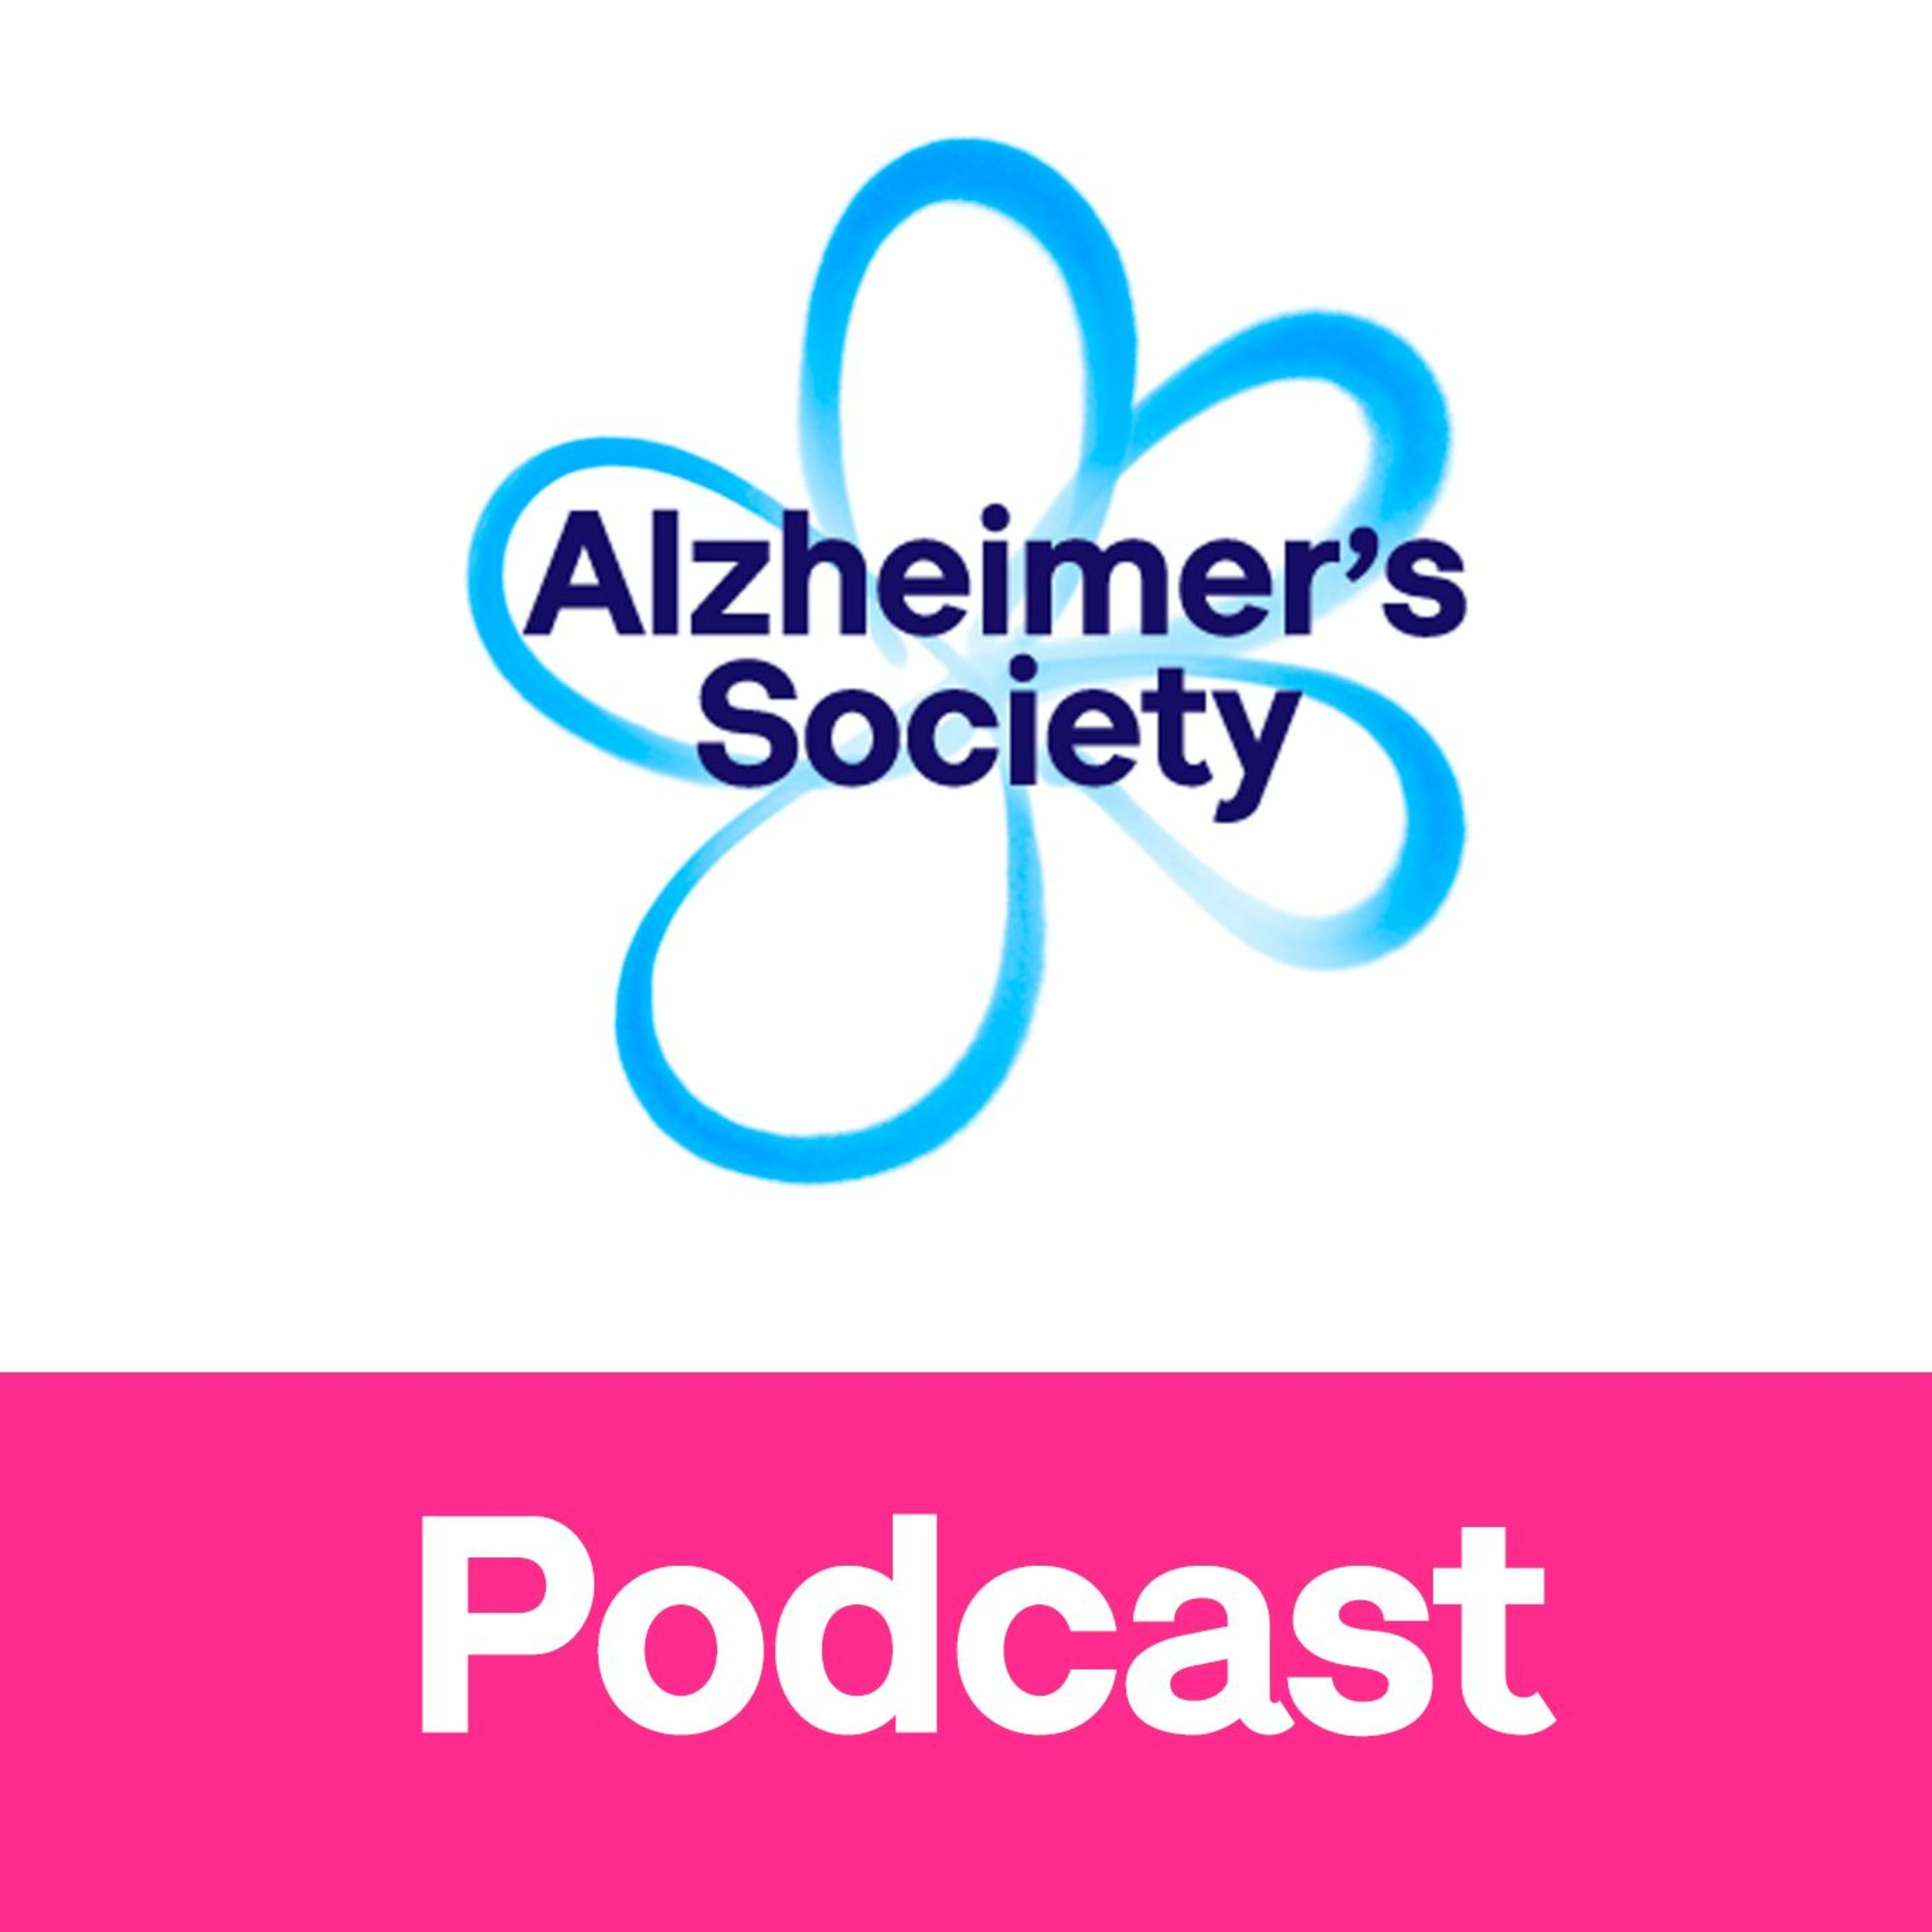 Hospital discharge and NHS continuing healthcare - Alzheimer’s Society podcast December 2015